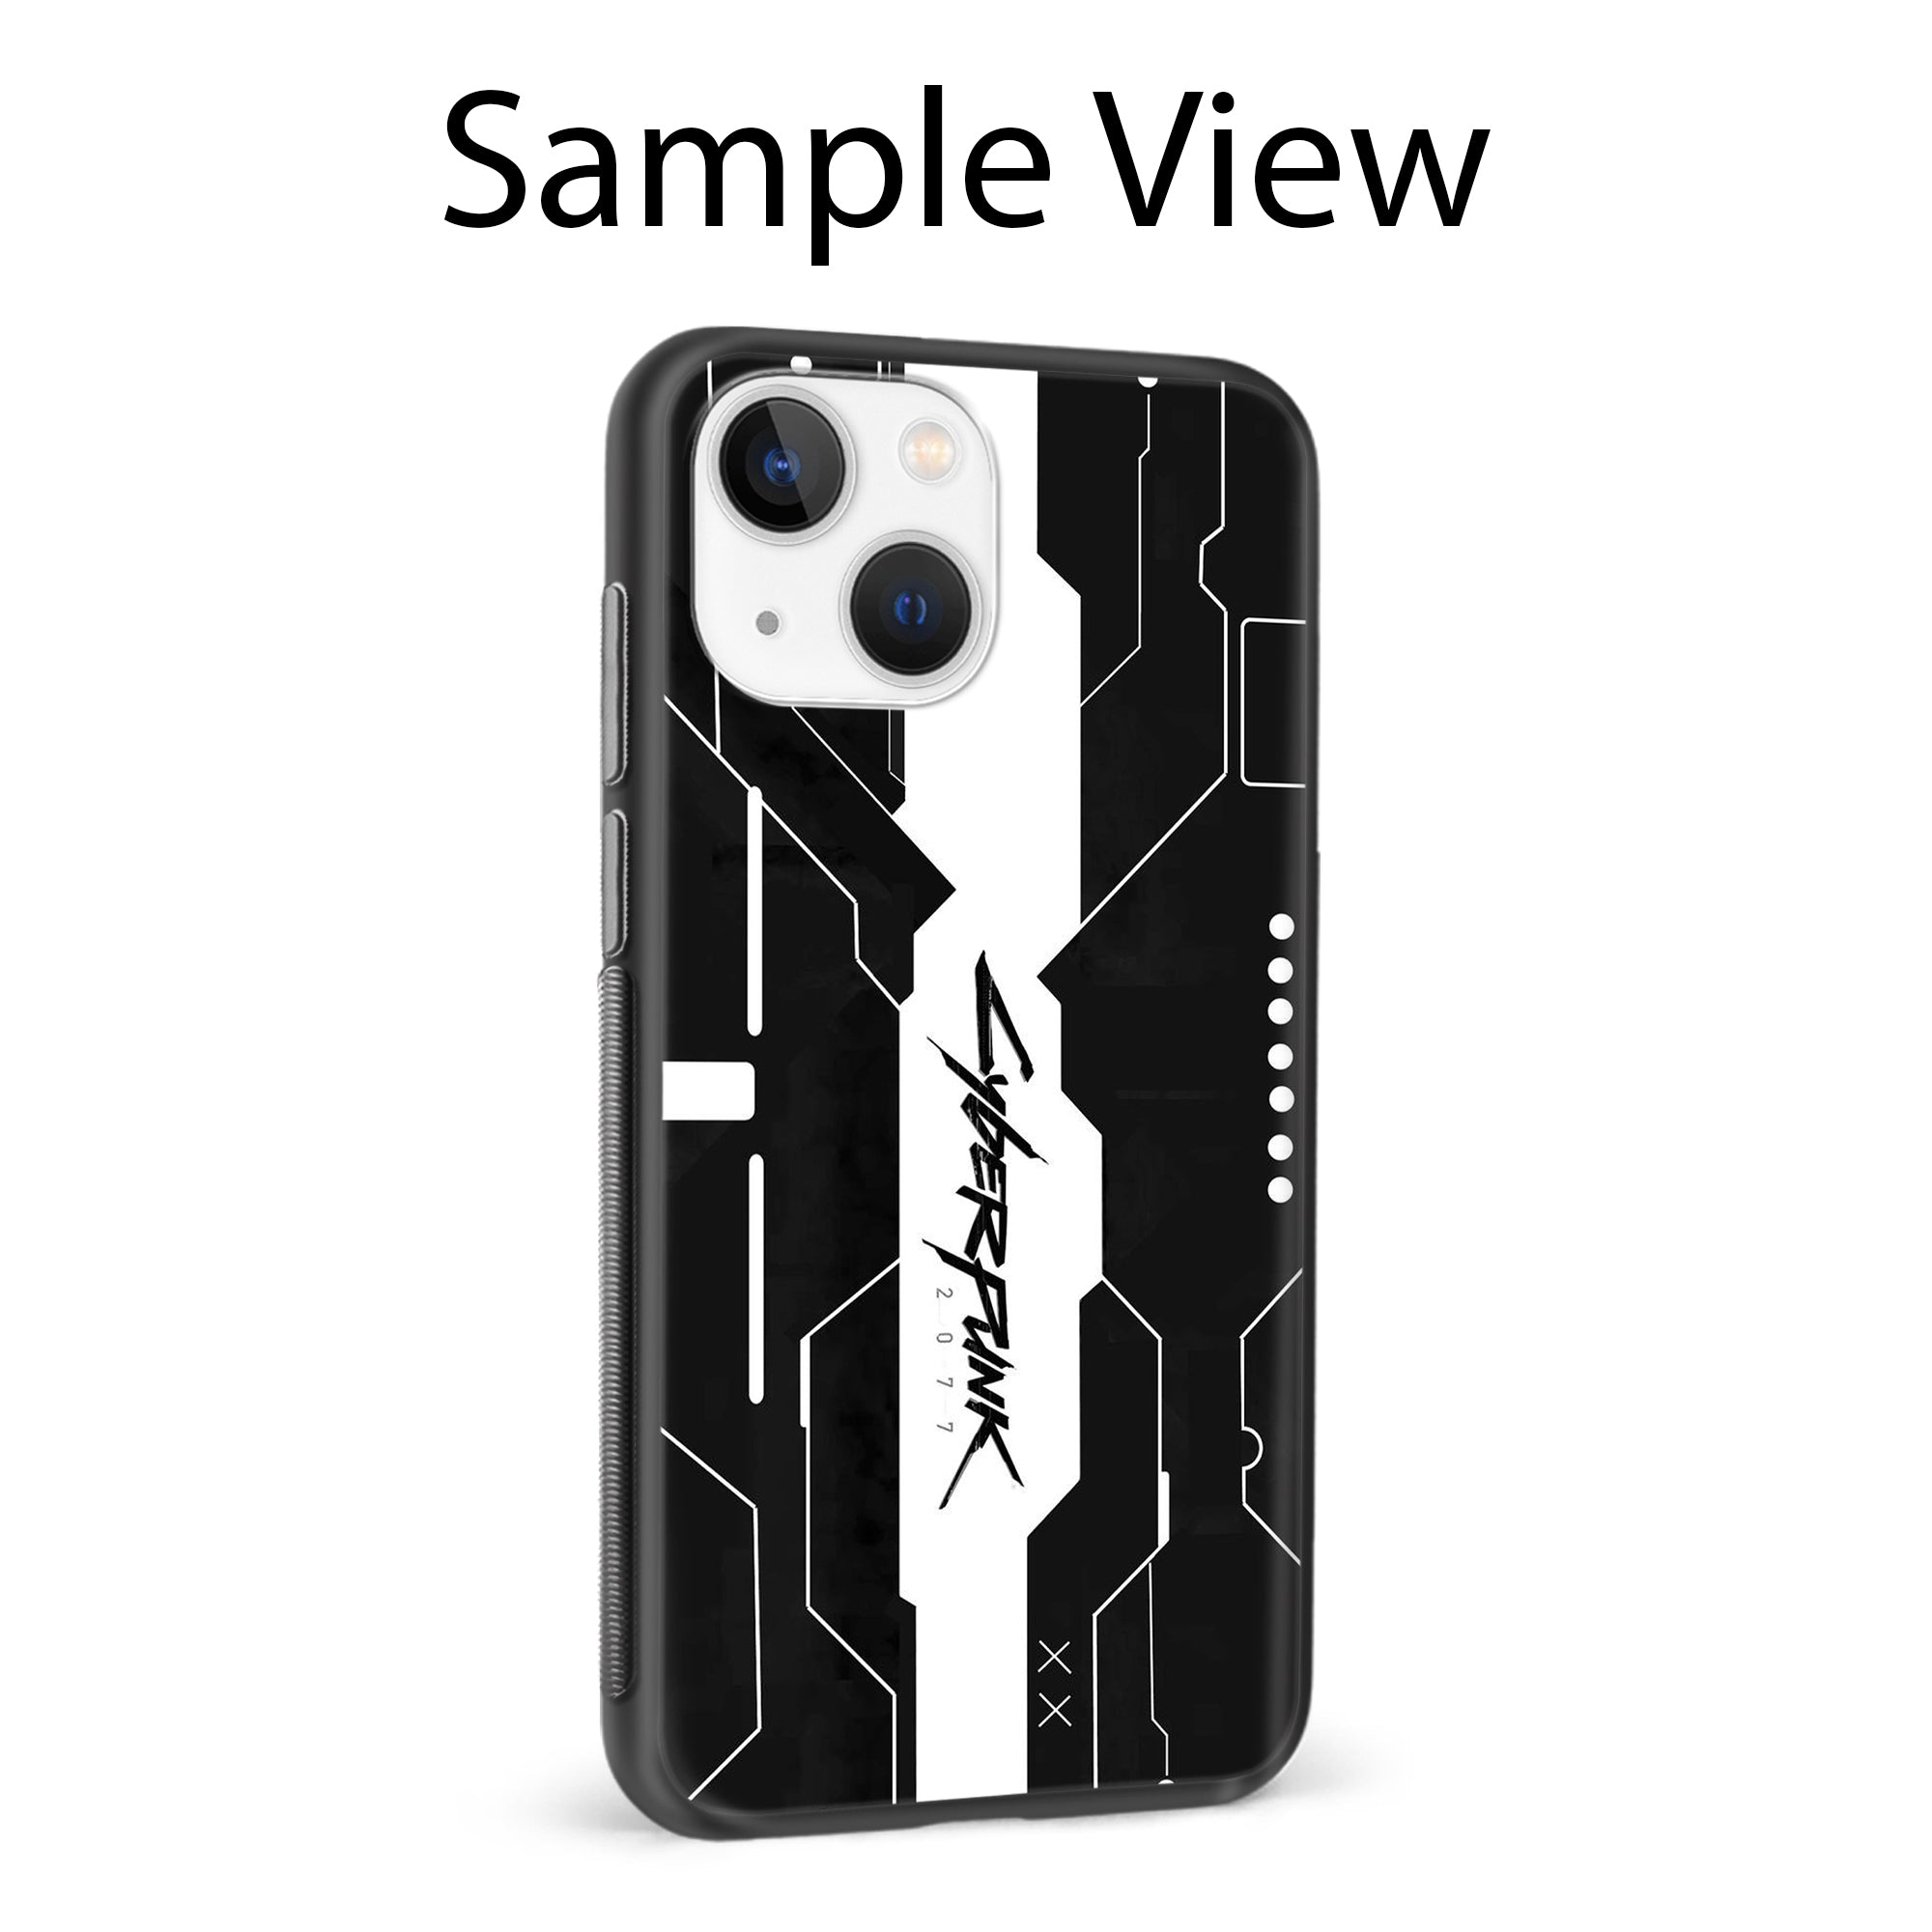 Buy Cyberpunk 2077 Art Glass/Metal Back Mobile Phone Case/Cover For Apple iPhone 12 pro max Online